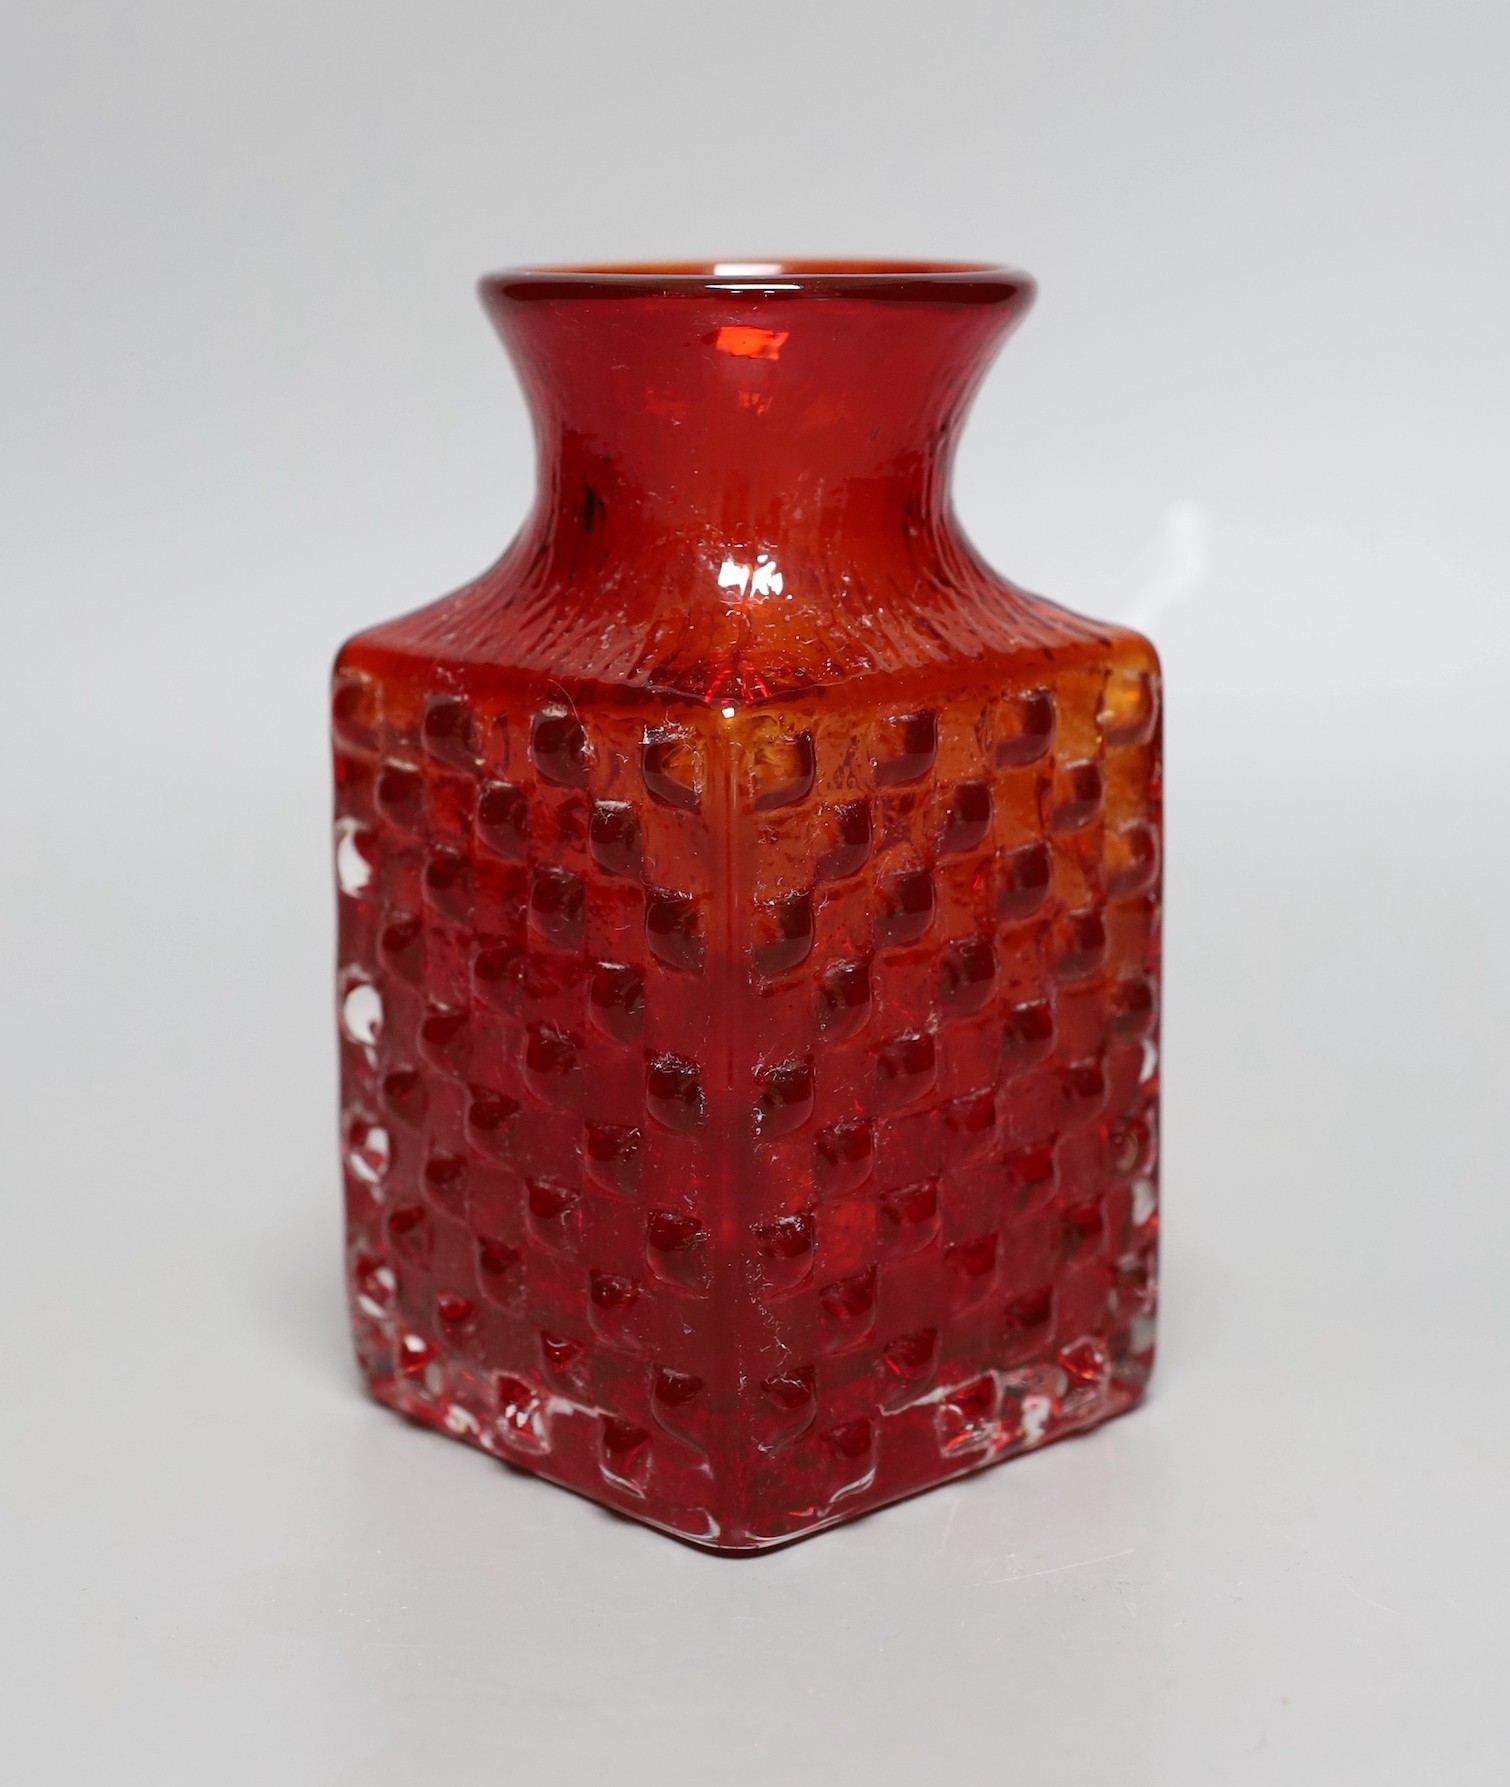 A Whitefriars 'Chess' glass vase, designed by Geoffrey Baxter, pattern number 9817, red glass, 14.5cm tall